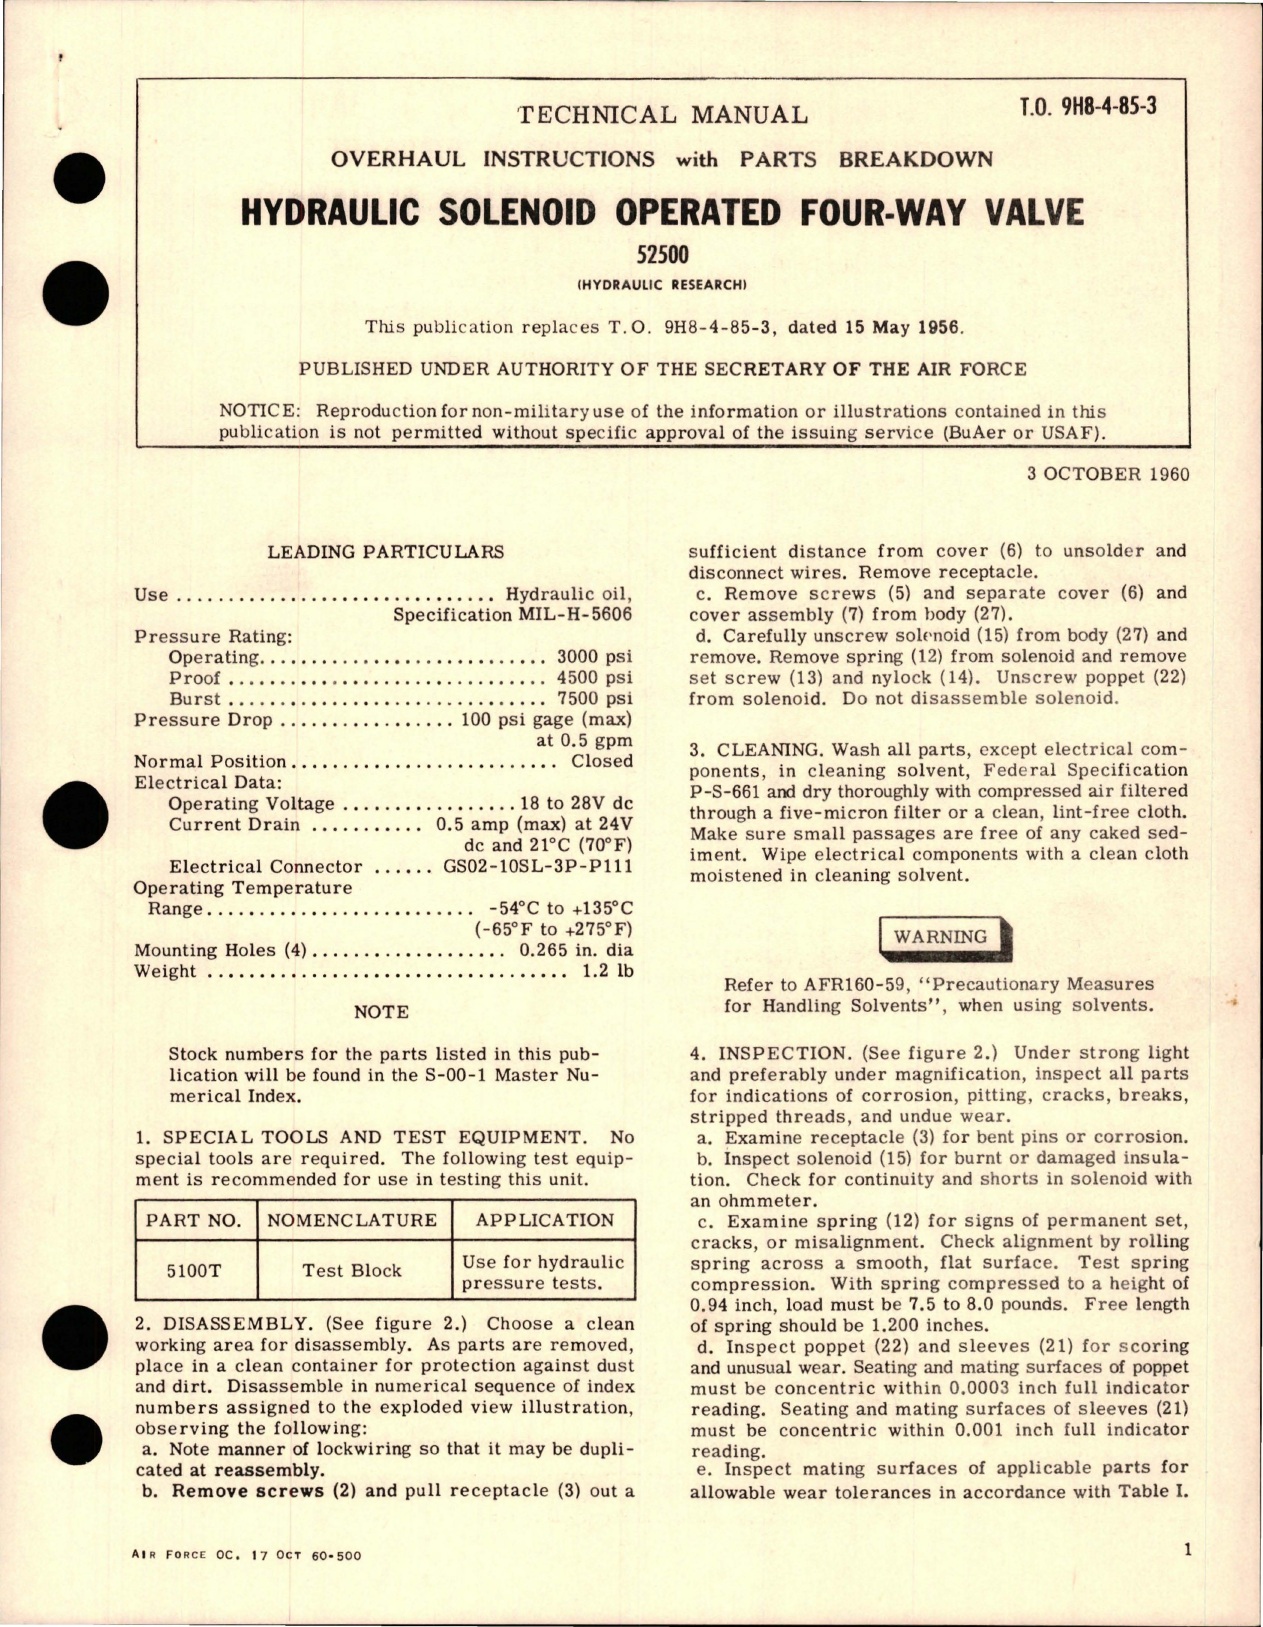 Sample page 1 from AirCorps Library document: Overhaul Instructions with Parts Breakdown for Hydraulic Solenoid Operated Four-Way Valve - 52500